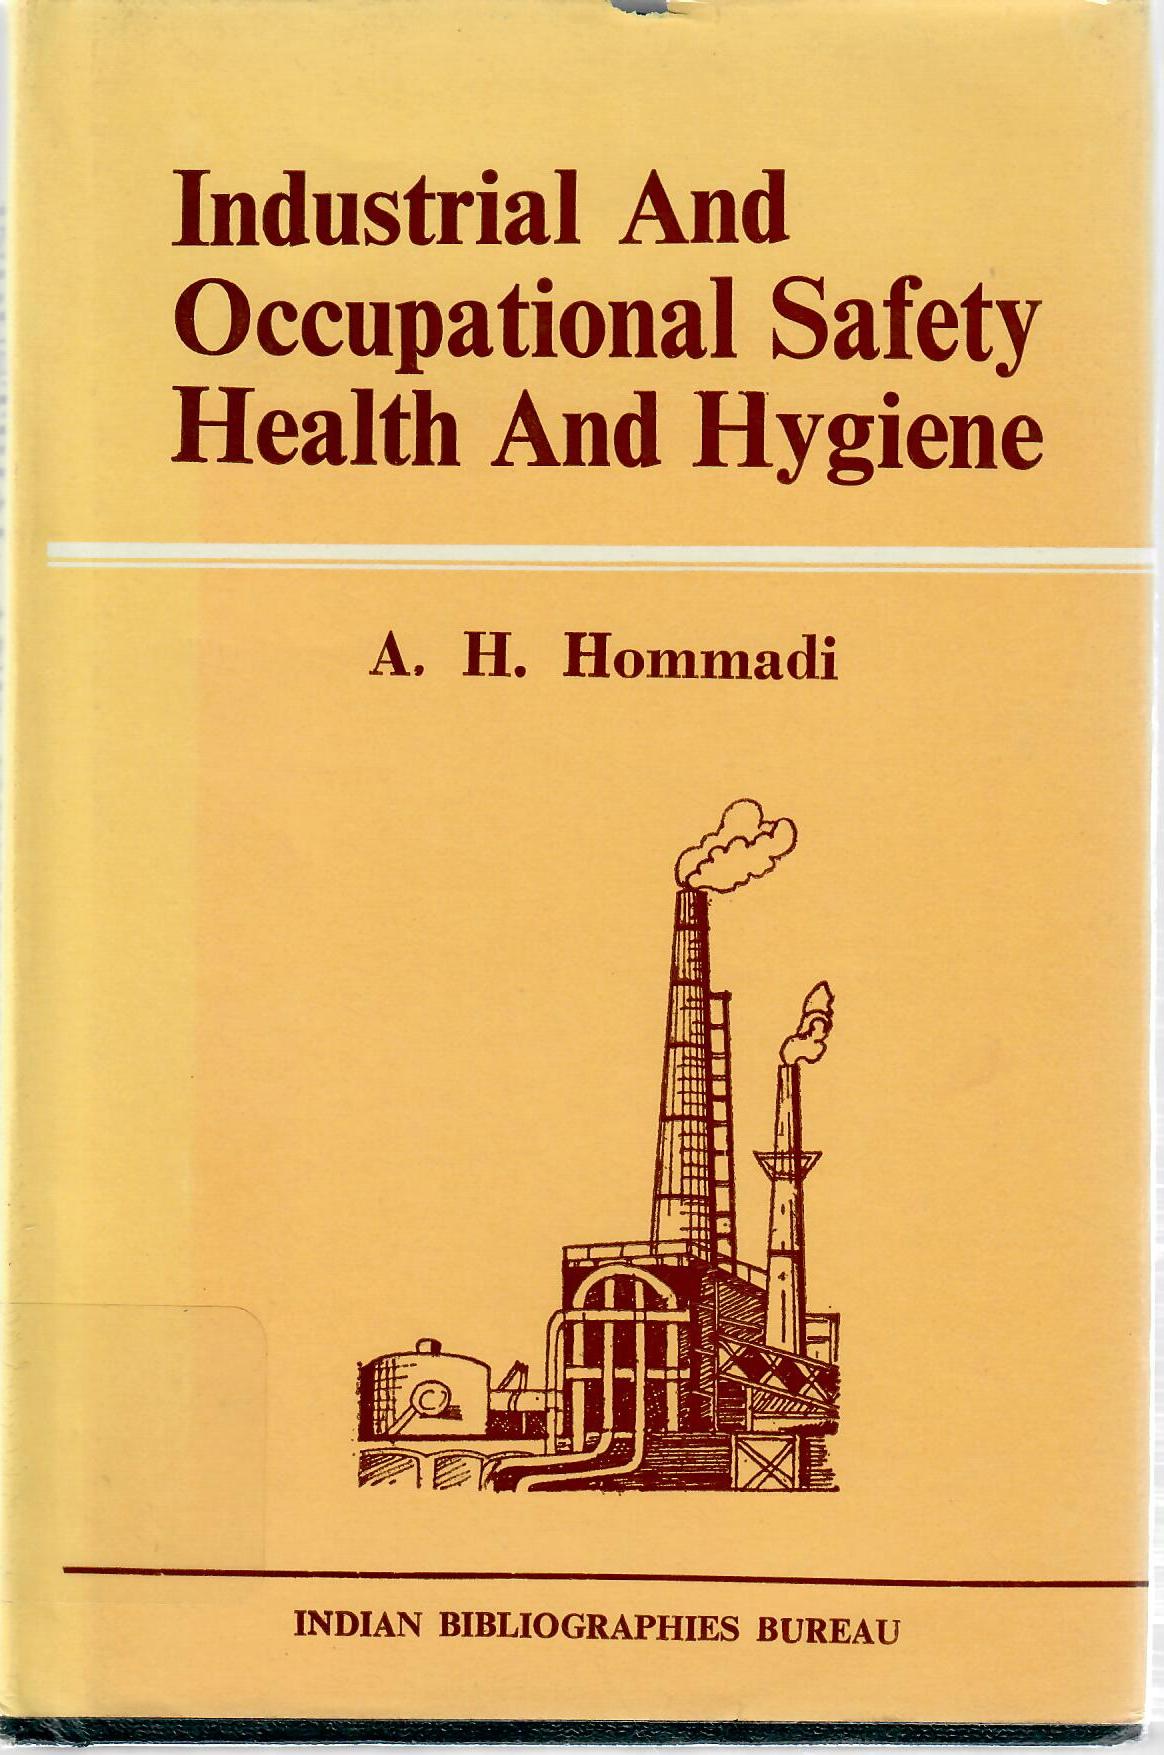 Industrial And Occupational Safety Health And Hygiene